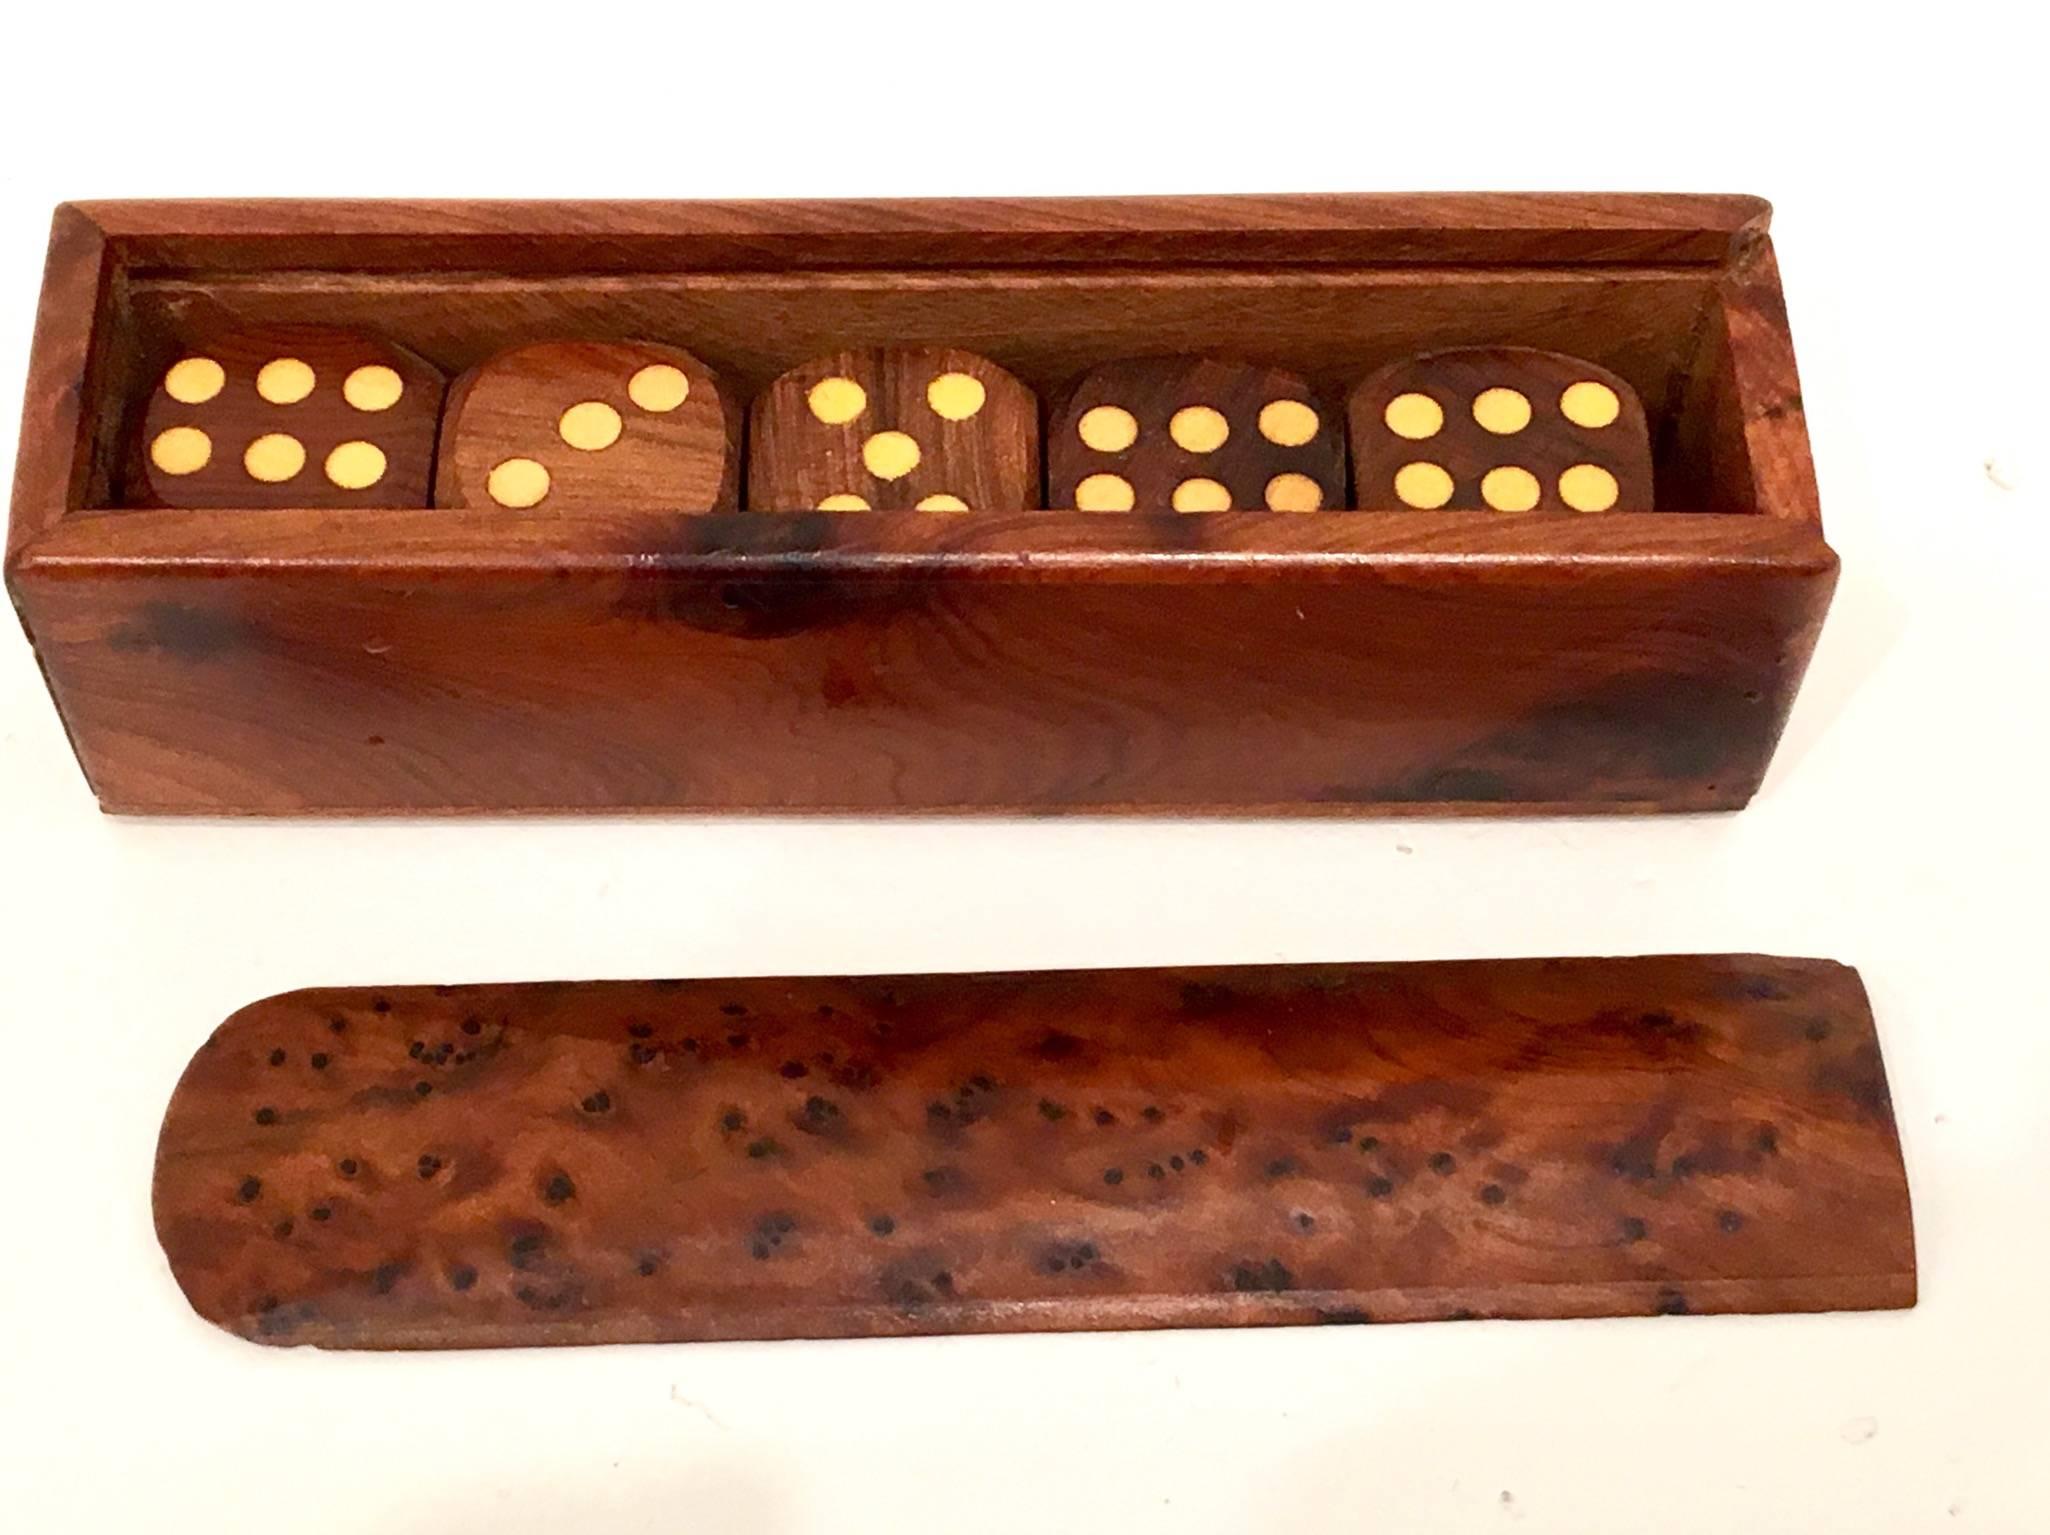 Beautiful dice game in solid burl wood, circa 1960s hand-carved. Five dice in a box.